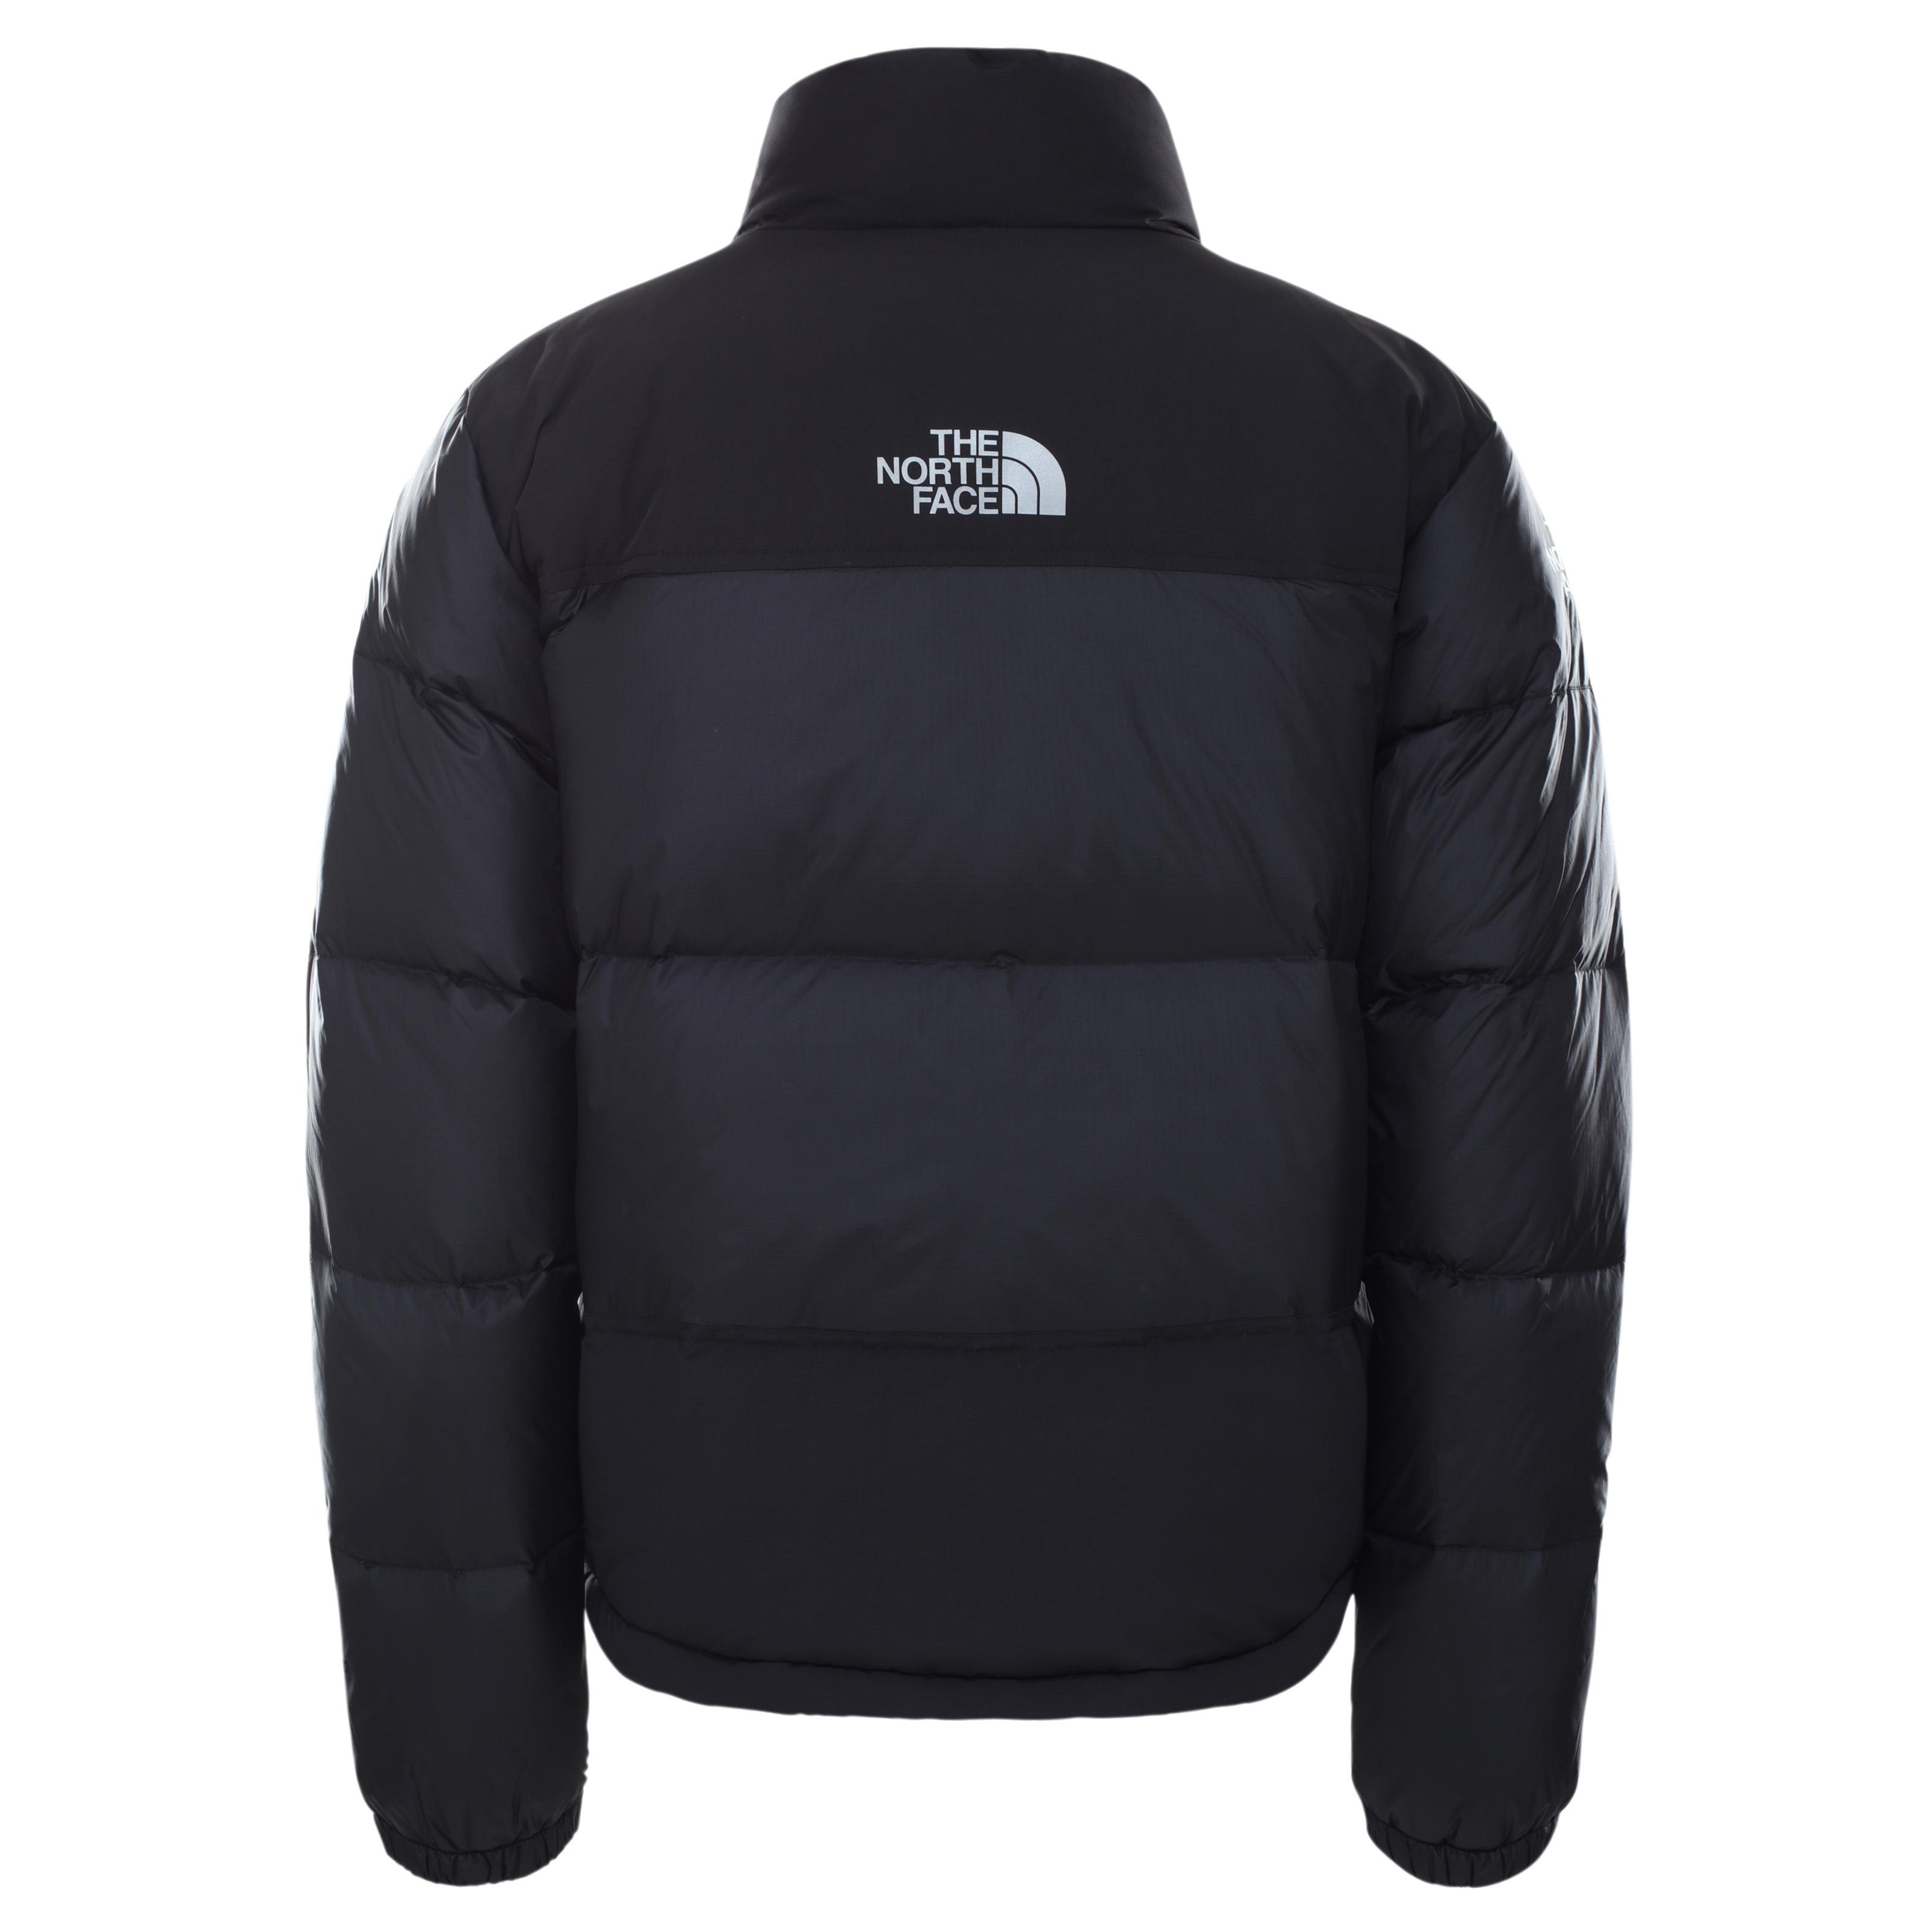 The North Face Steep Tech Down Jacket Tnf Black for Men - Lyst